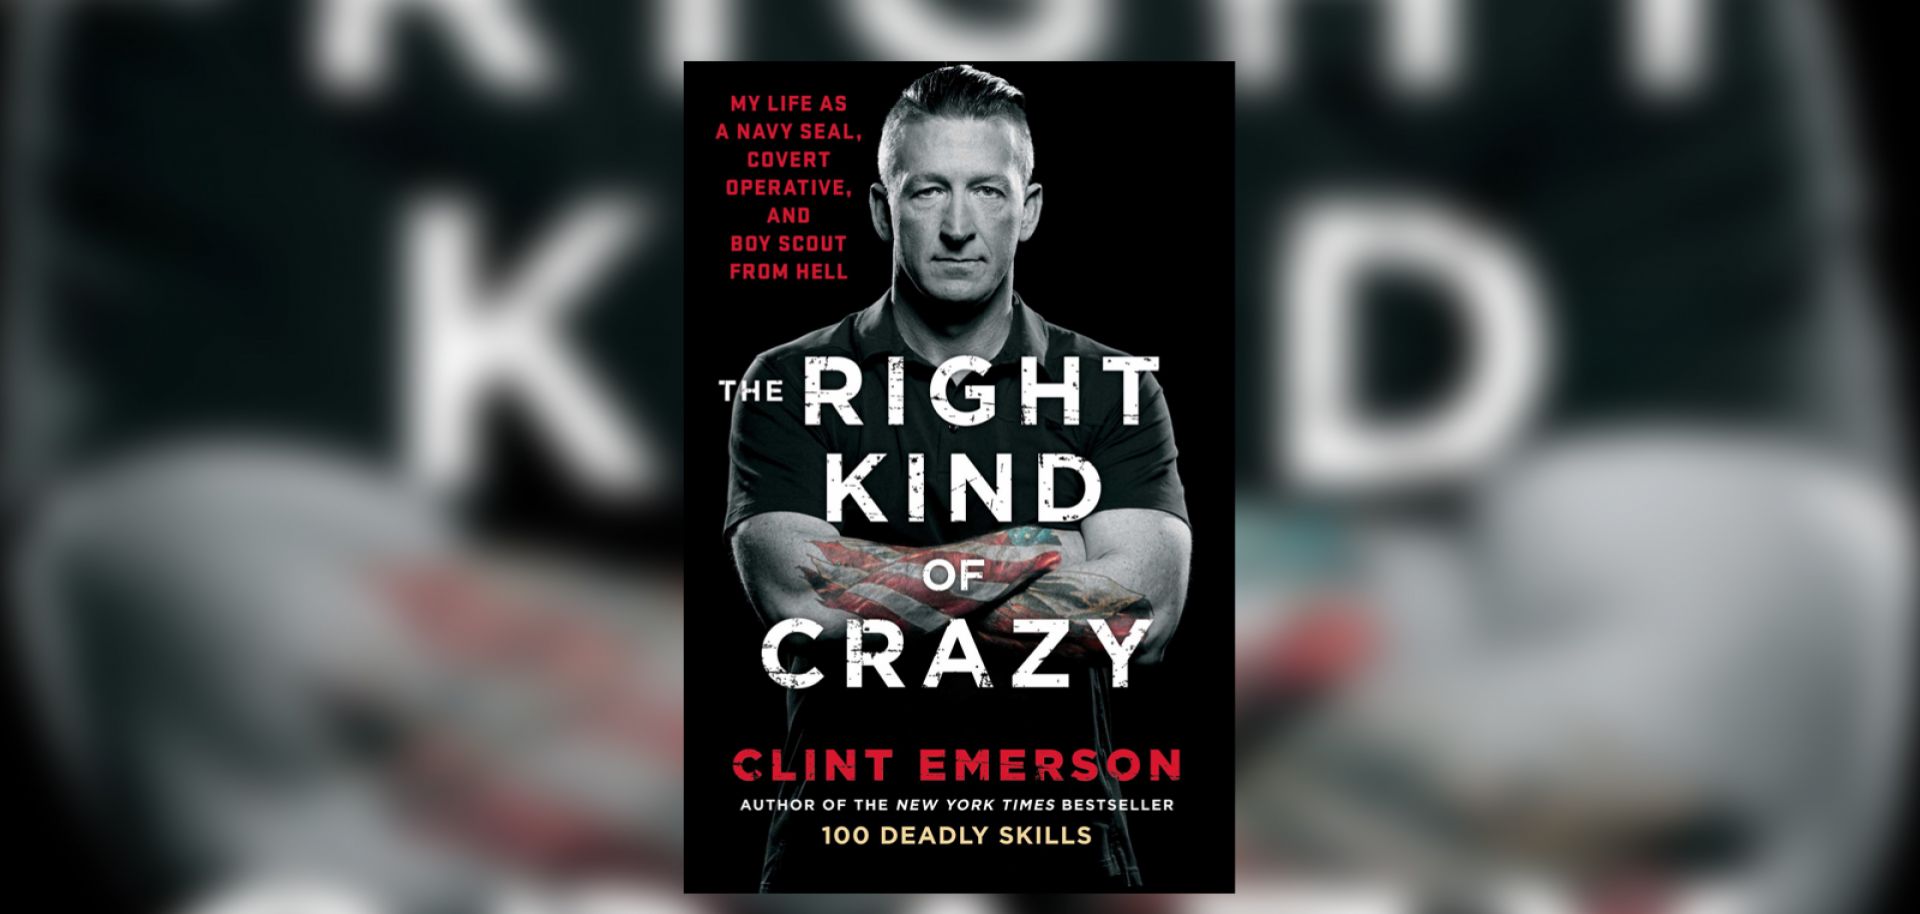 In his memoir, retired Navy SEAL Clint Emerson shares his experience as an elite operative whose sole mission was to keep the United States safe by whatever means necessary.